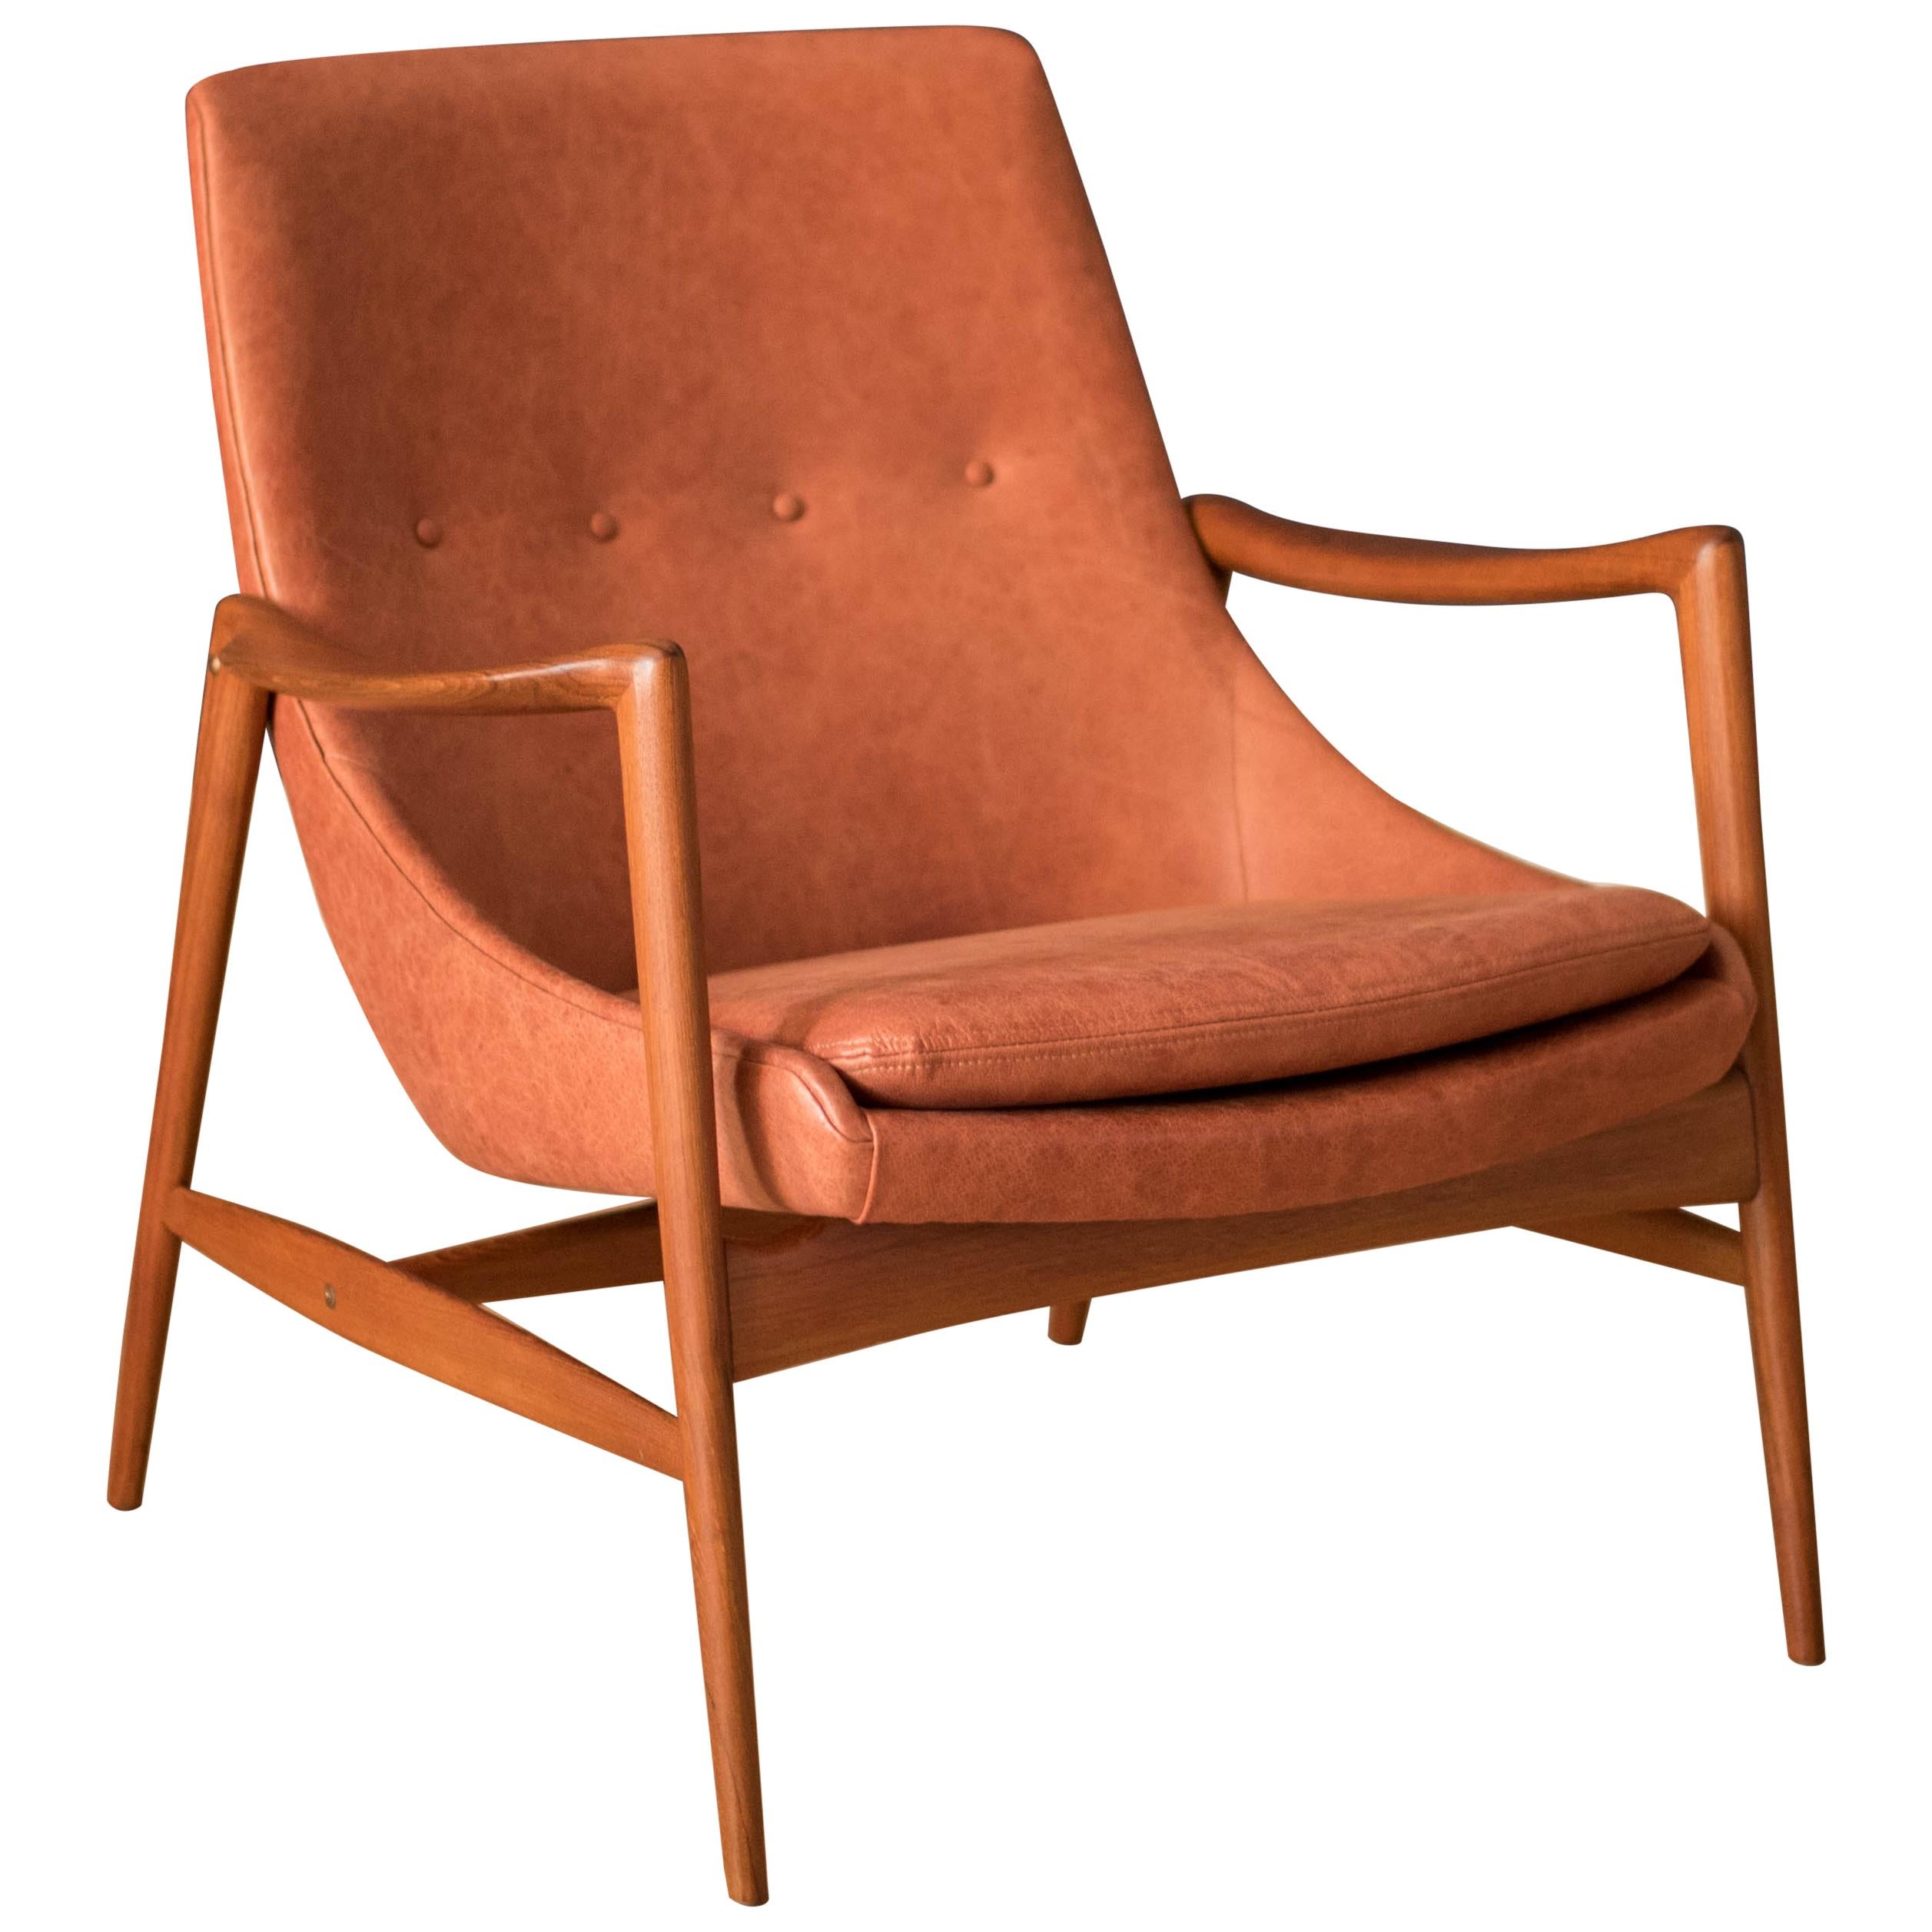 Vintage Leather and Teak Lounge Chair by Rolf Rastad & Adolf Relling